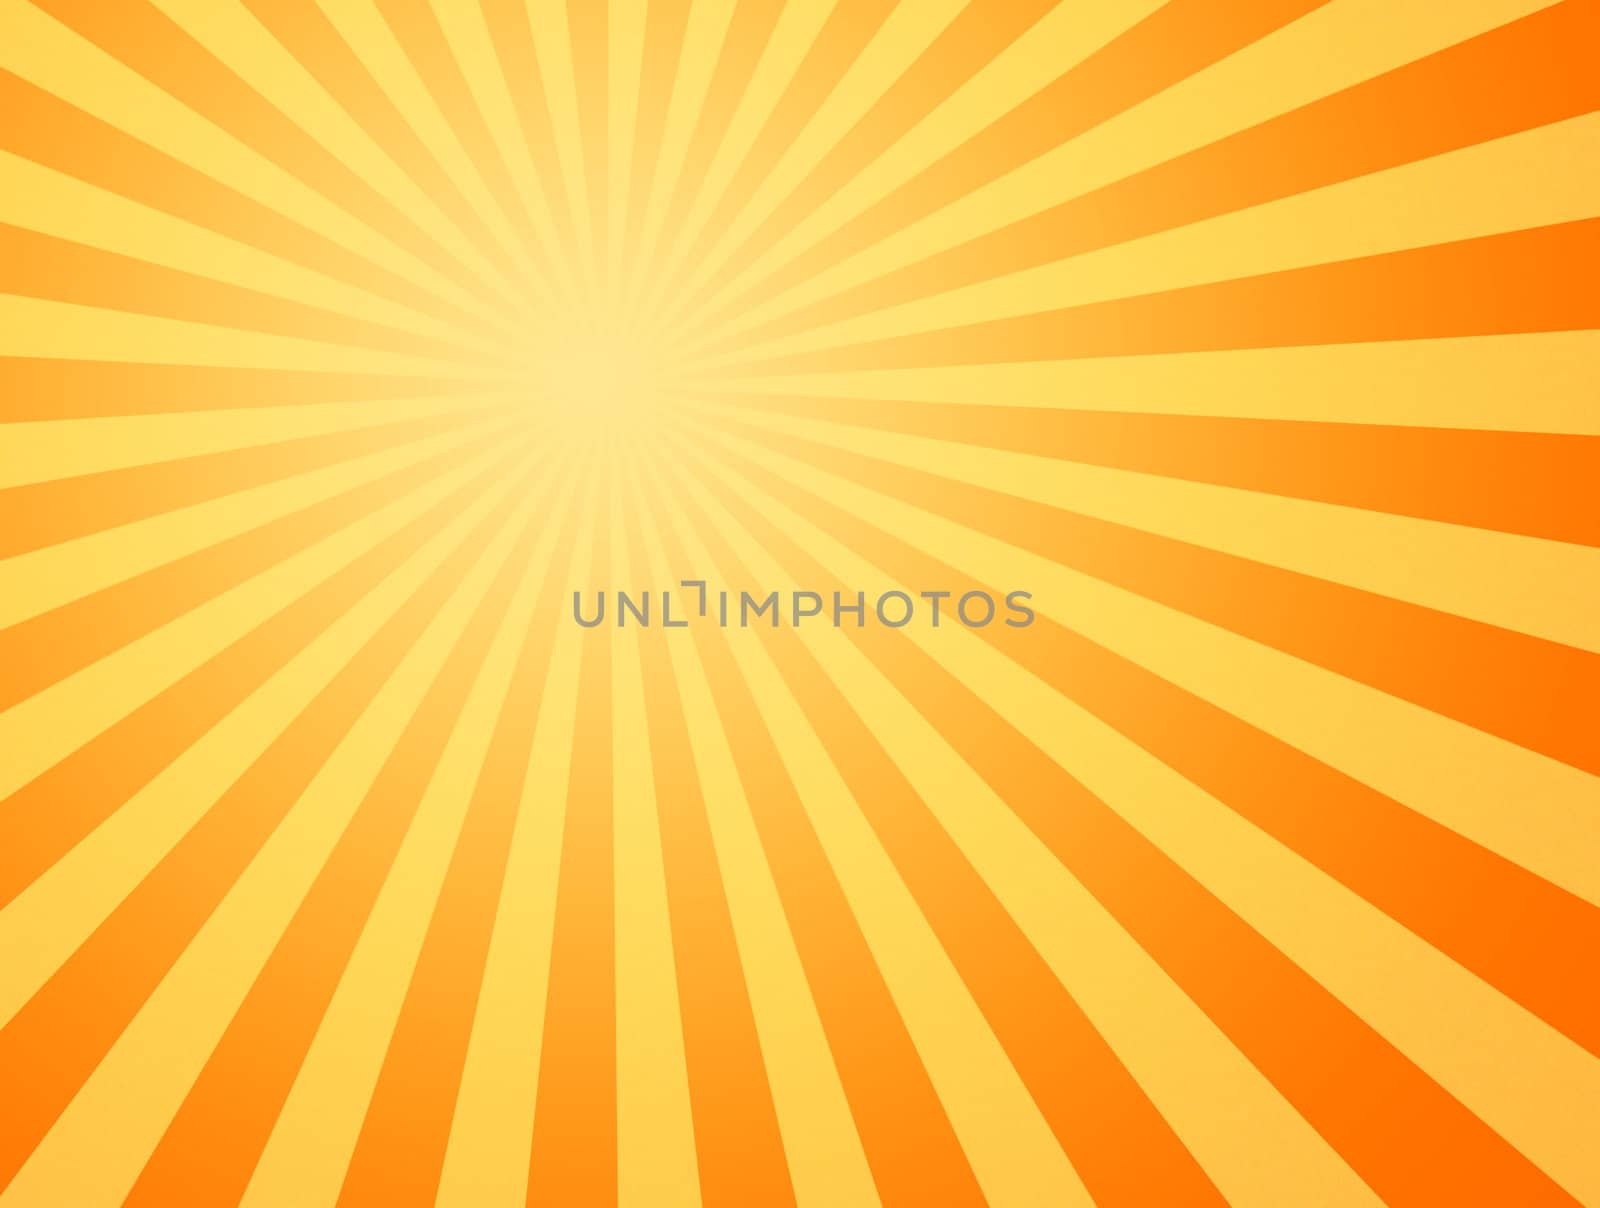 large yellow and orange image of the hot summer sun beating down